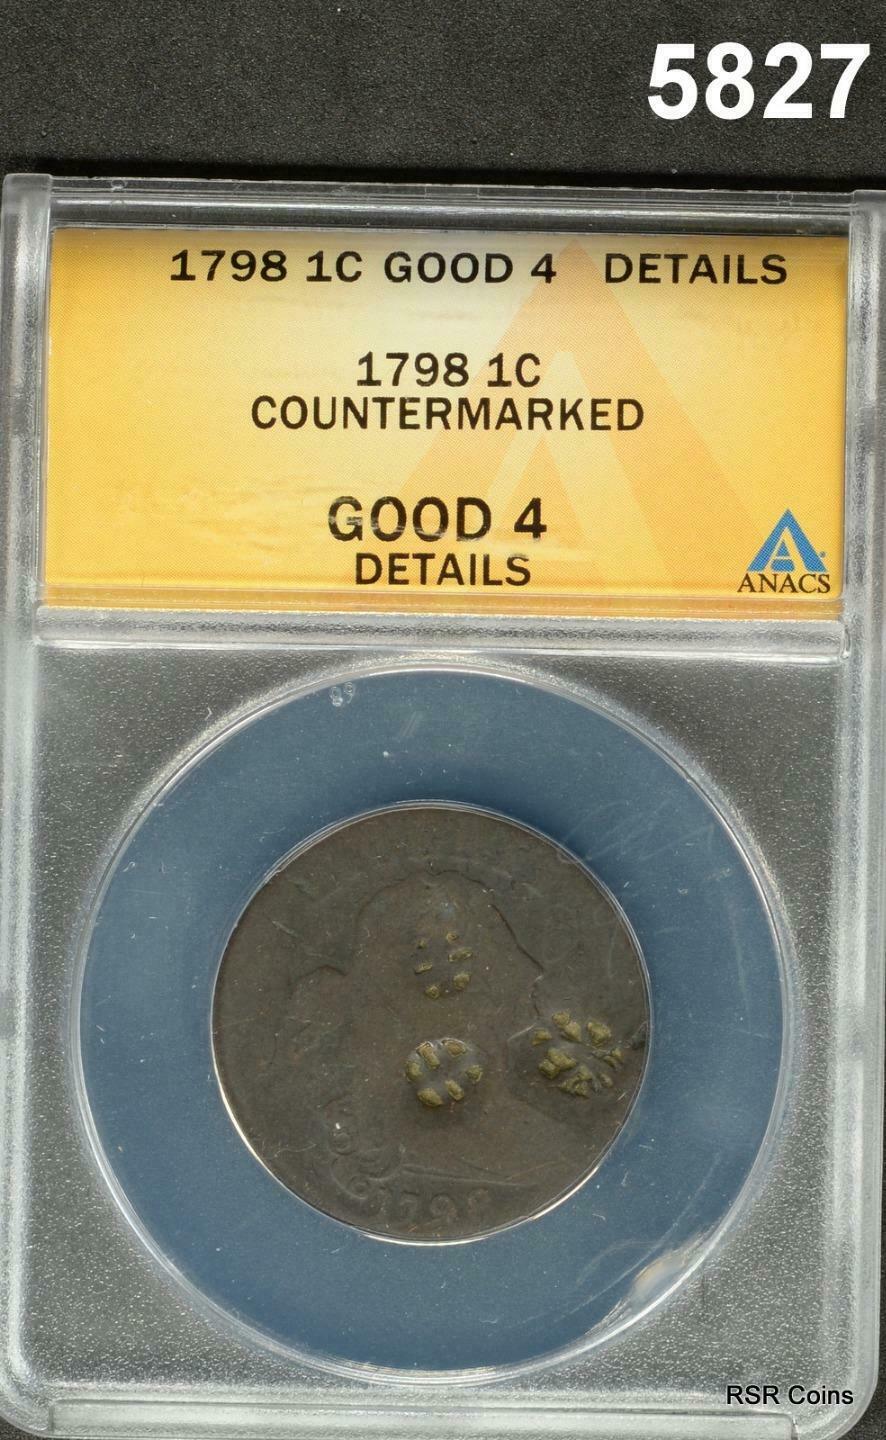 1798 LARGE CENT ANACS CERTIFIED GOOD 4 COUNTERMARKED #5827